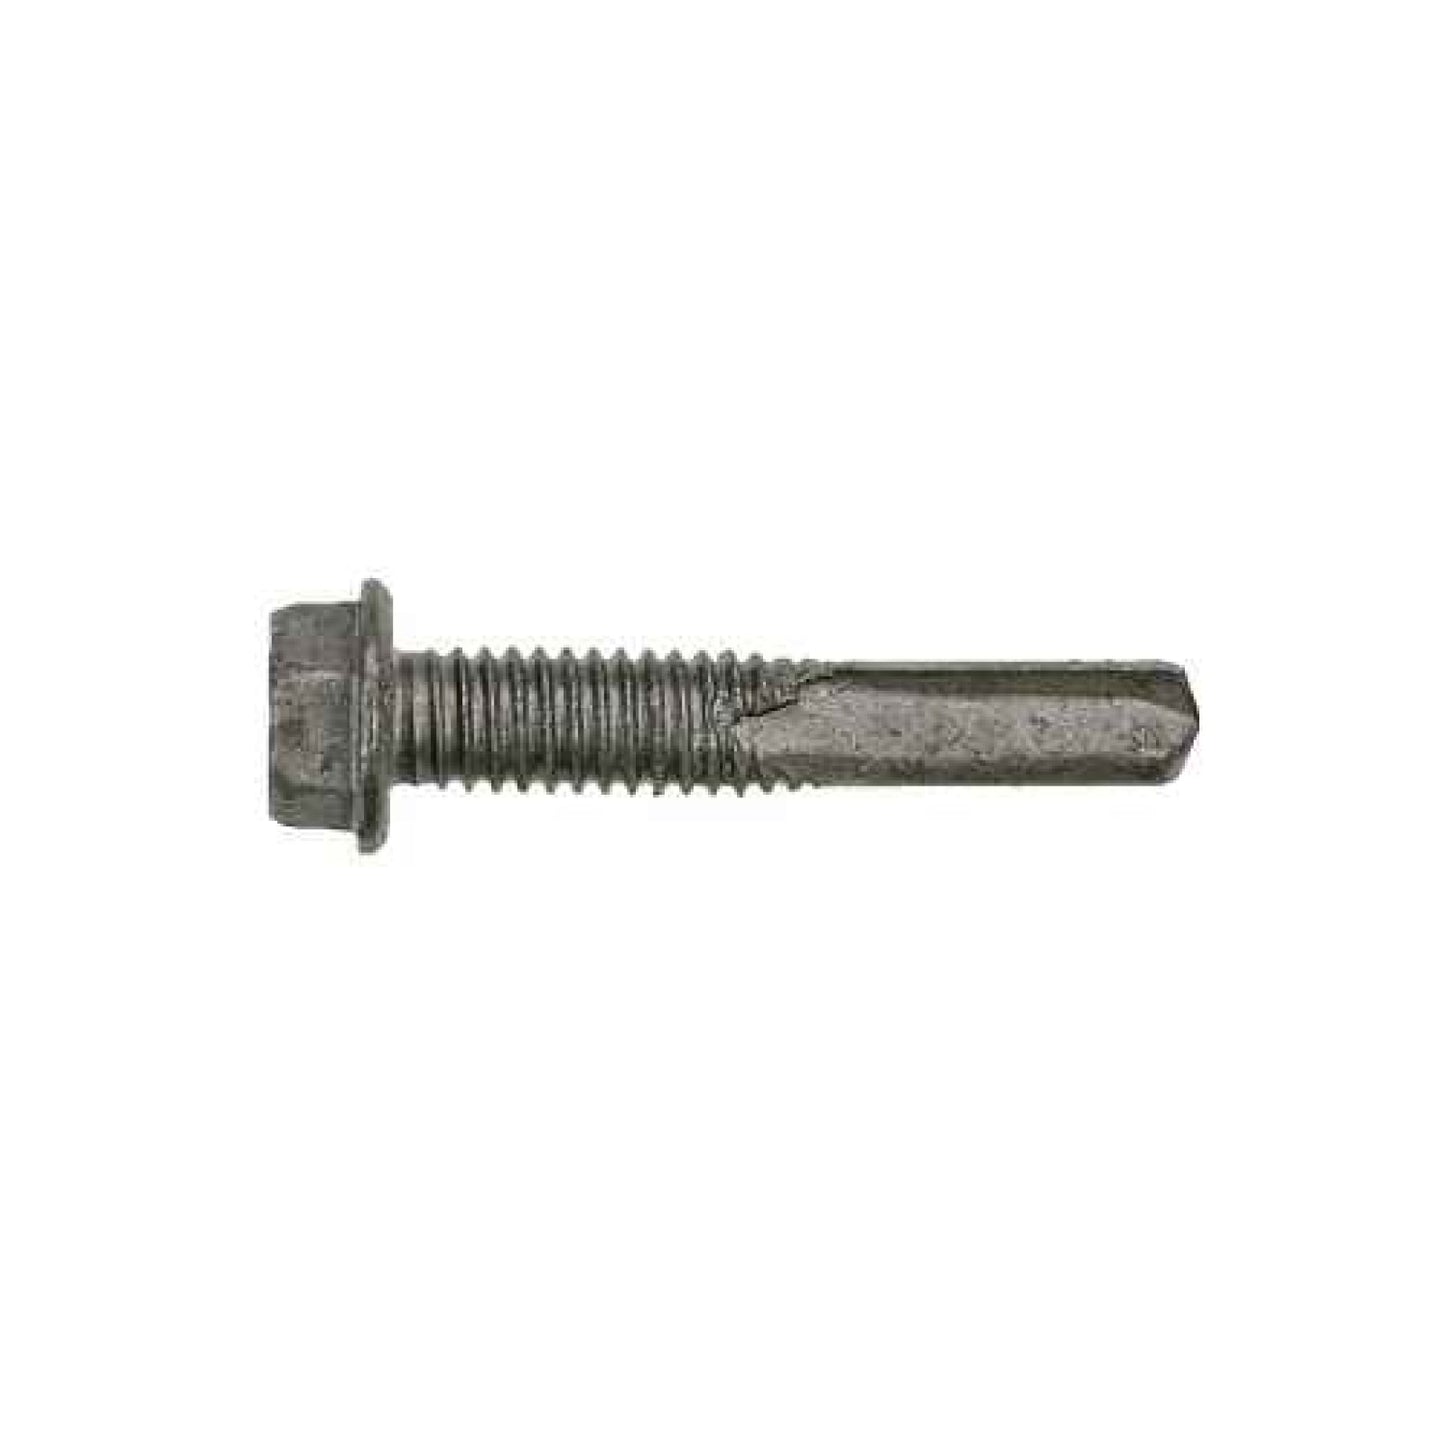 Simpson Strong-Tie X1B1016-4K #10 x 1" Strong-Drive Self-Drilling Screw - Clear Zinc Coating - Loose - Pkg 4,000